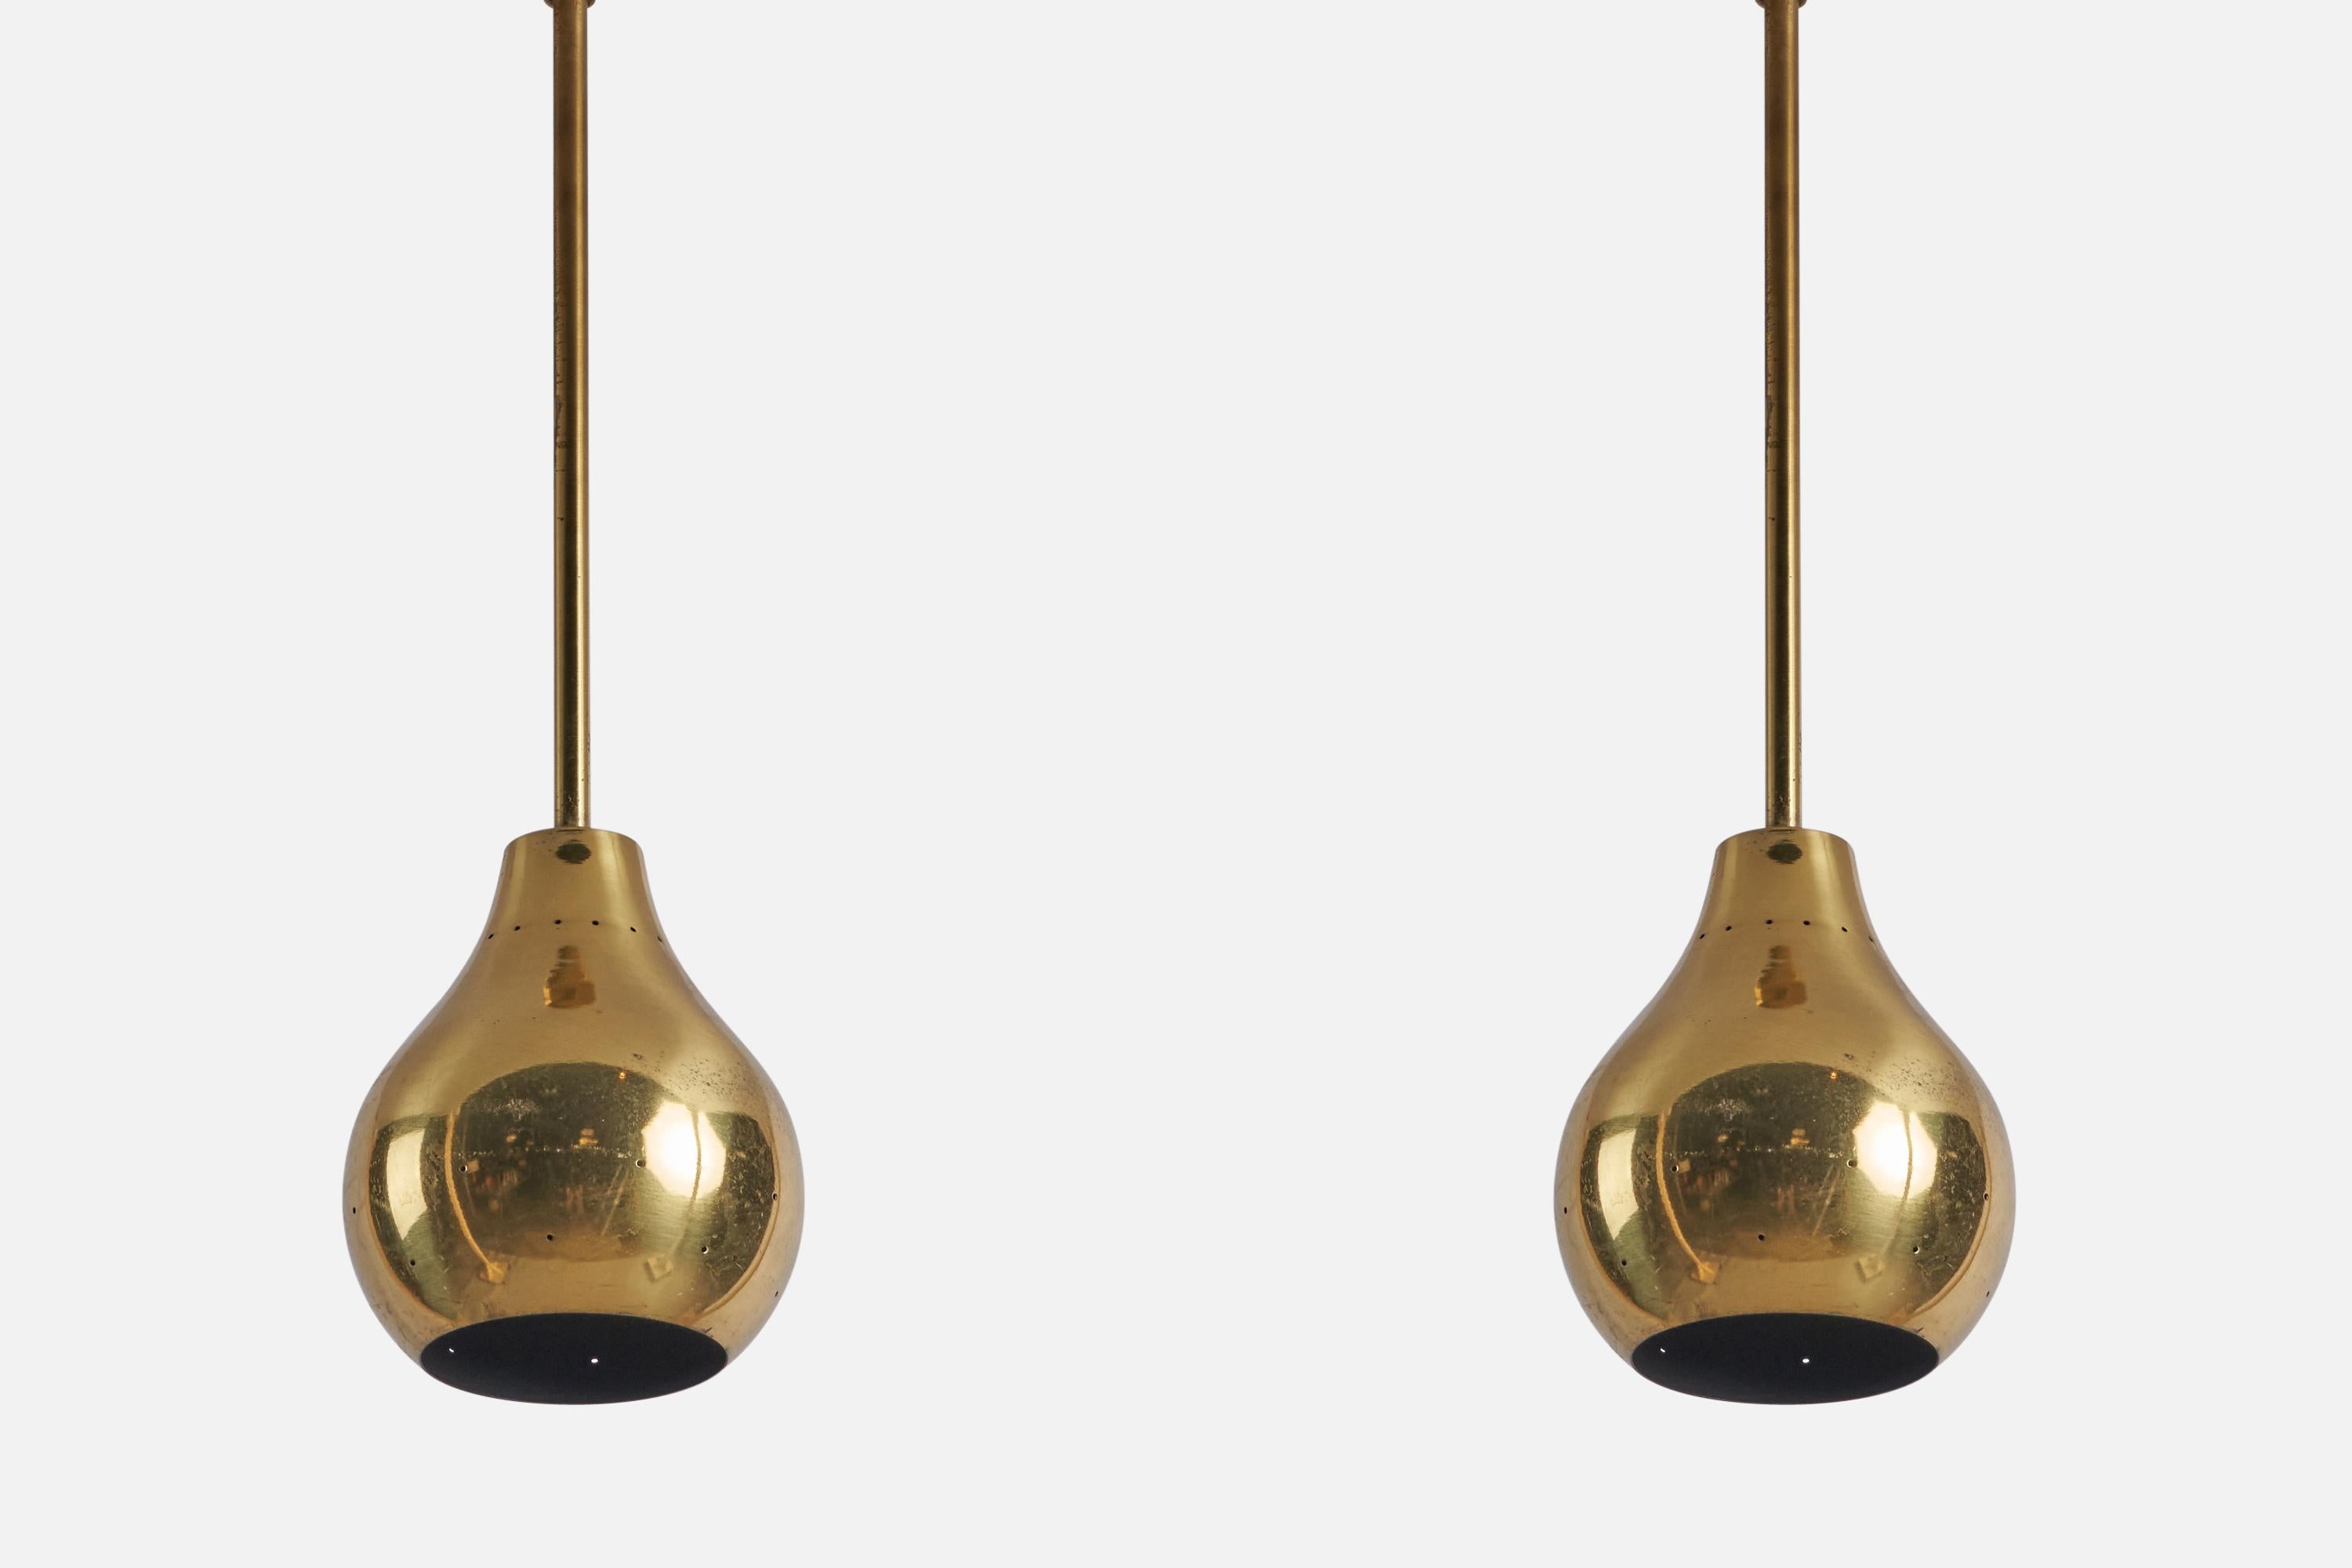 A pair of brass pendant lights designed and produced in the US, 1950s.

Overall Dimensions (inches): 22” H x 6.5” Diameter

Bulb Specifications: E-26 Bulb

Number of Sockets: 1

Ceiling roses intended for hardwiring not illustrated, please inquire